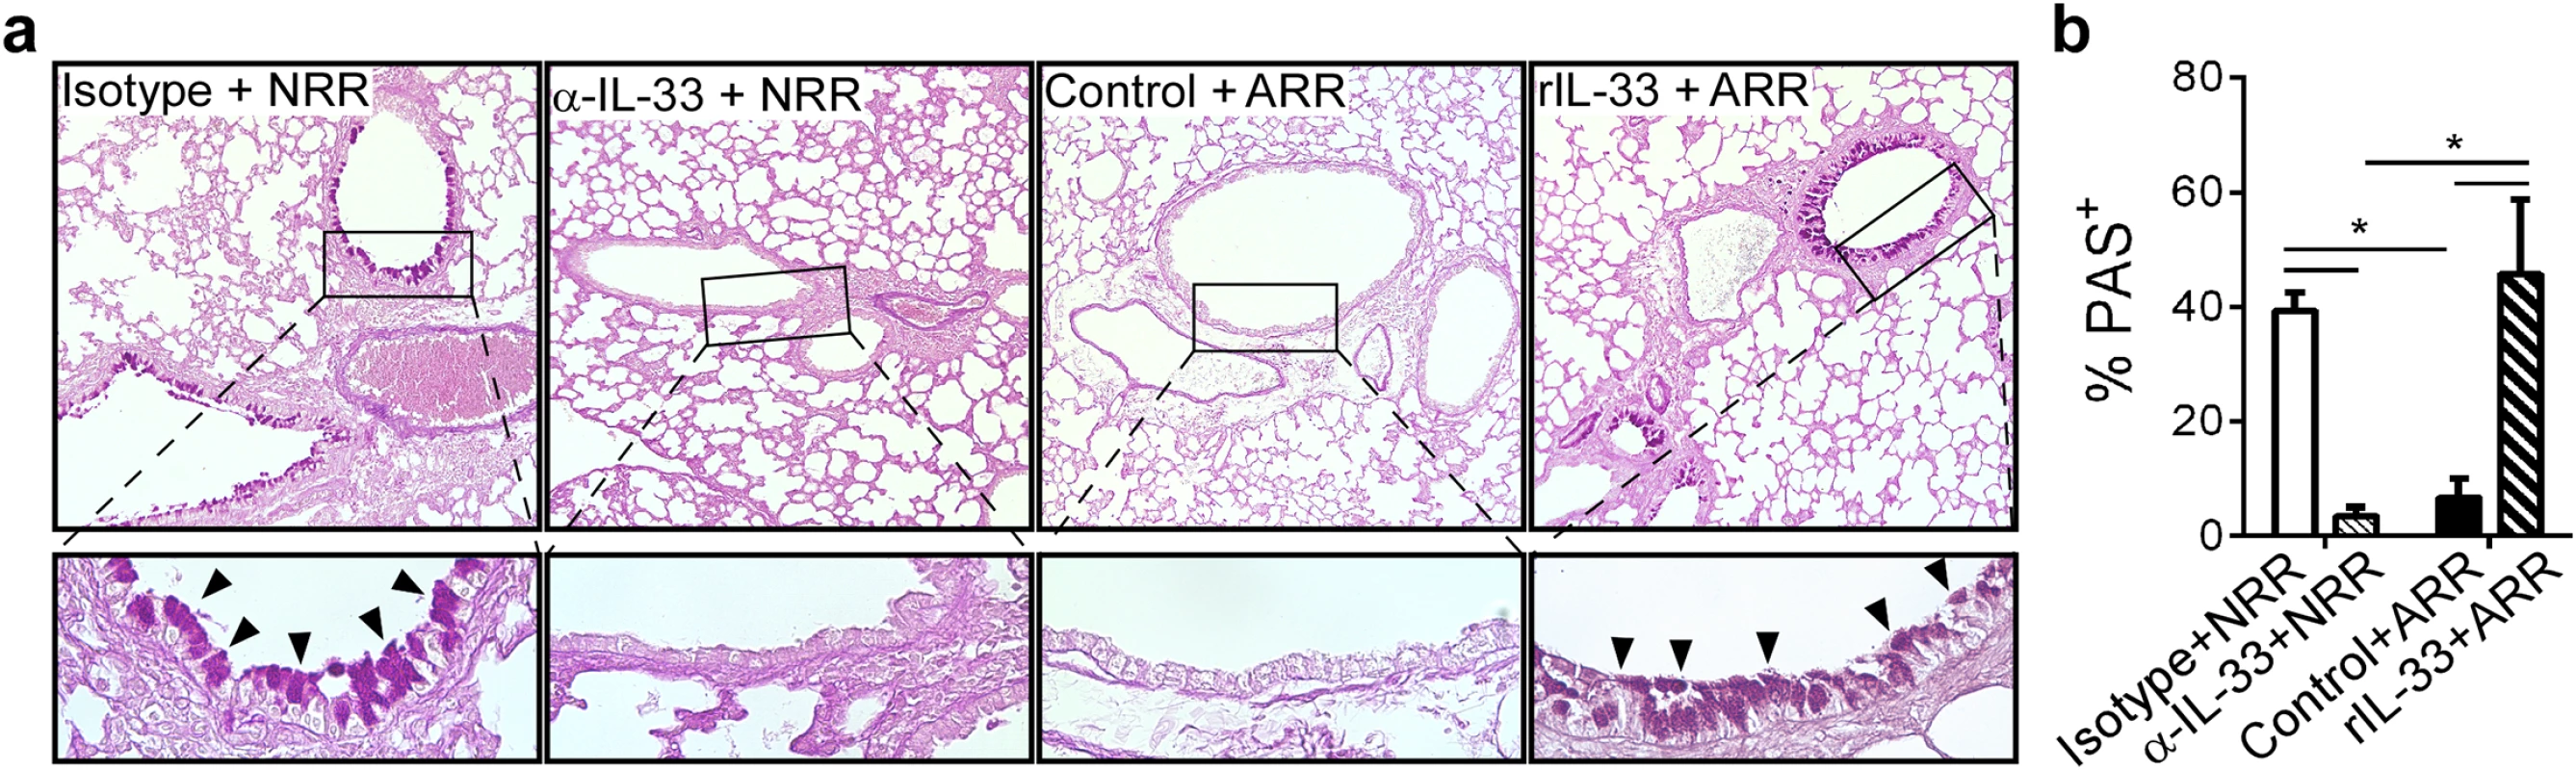 IL-33 levels during primary RSV infection determine disease severity after reinfection.